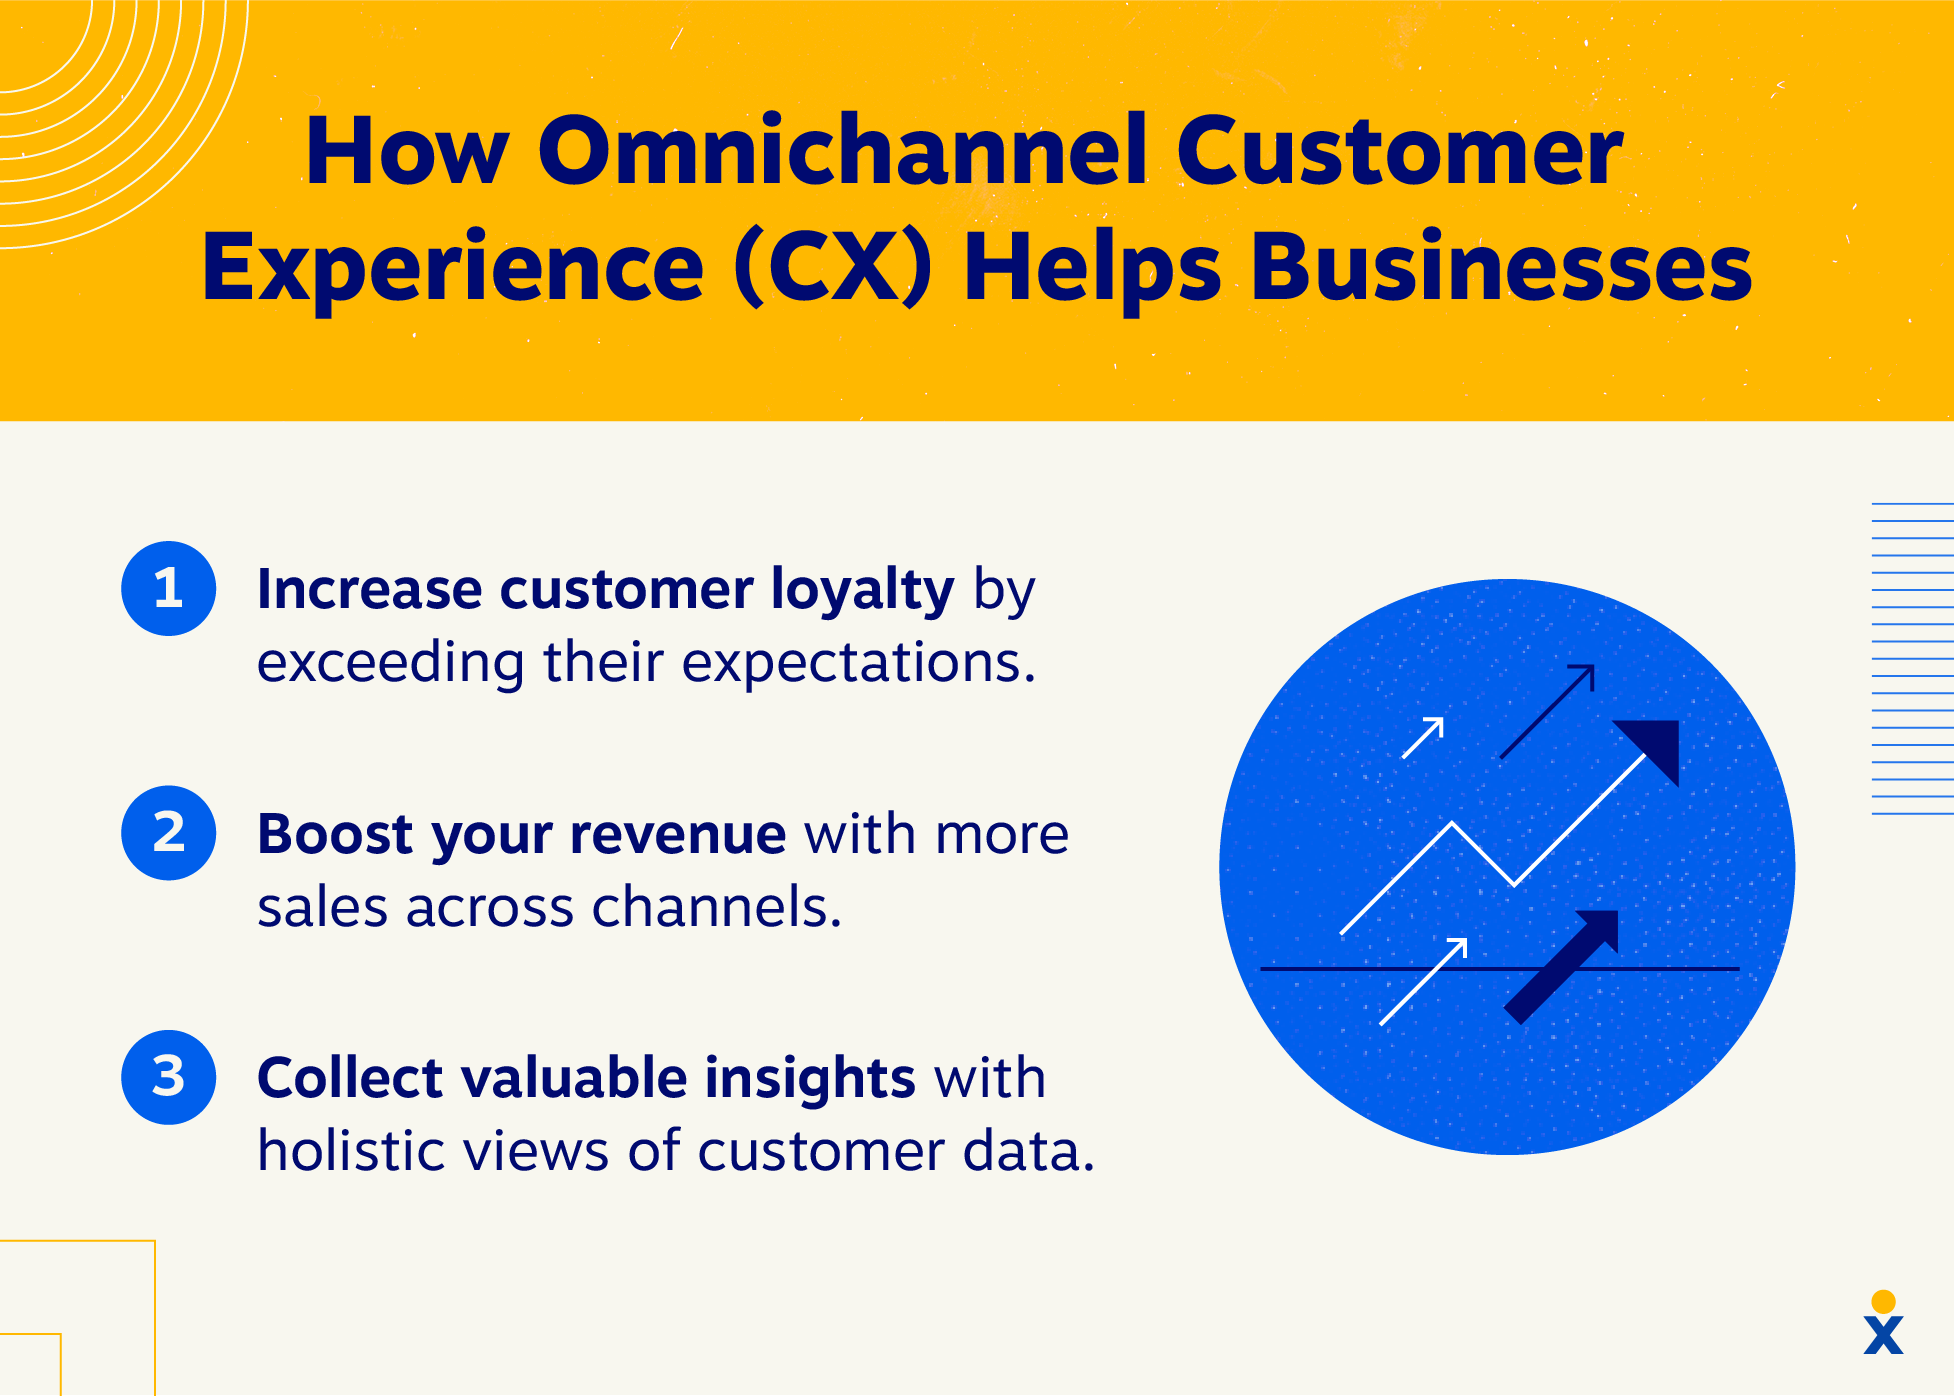 3 reasons how omnichannel customer experience helps businesses